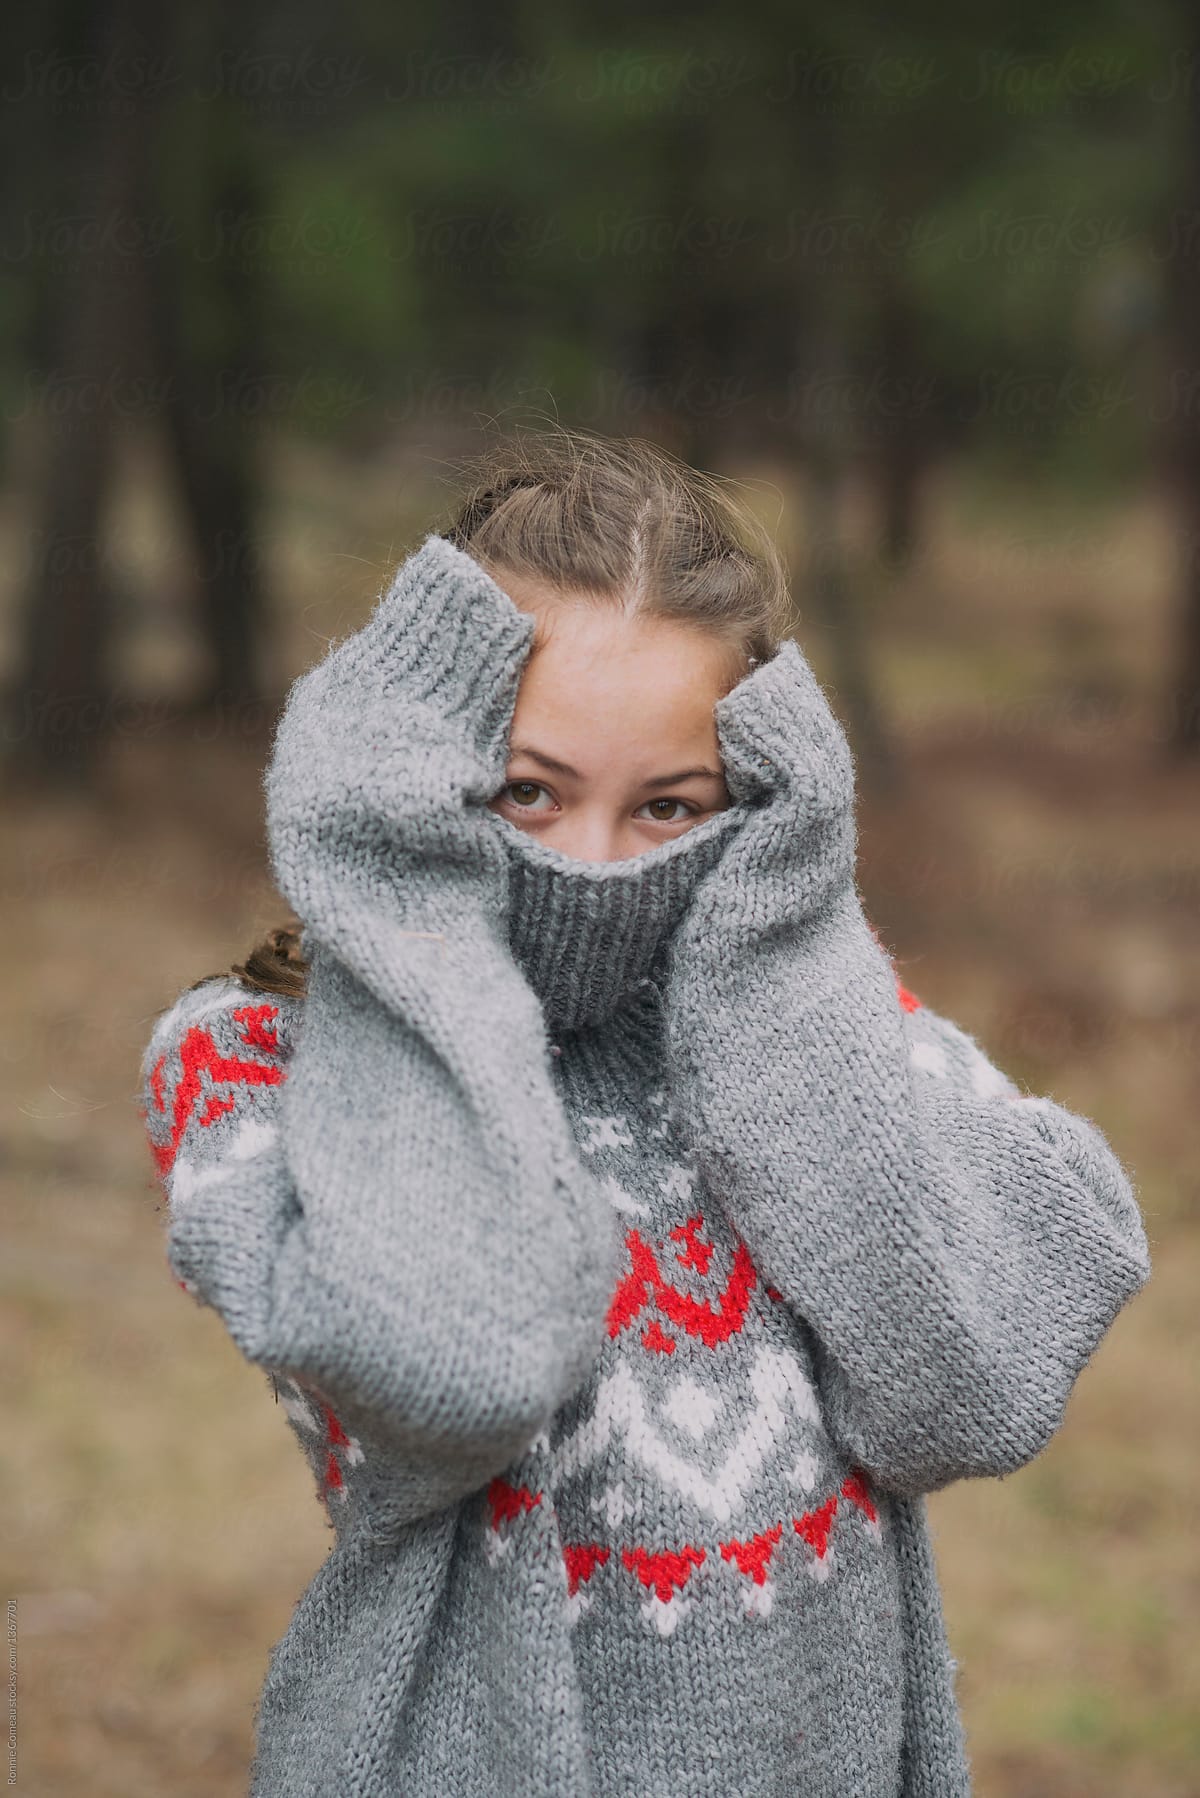 Teen Girl Wearing Oversized Sweater by Stocksy Contributor Ronnie Comeau  - Stocksy